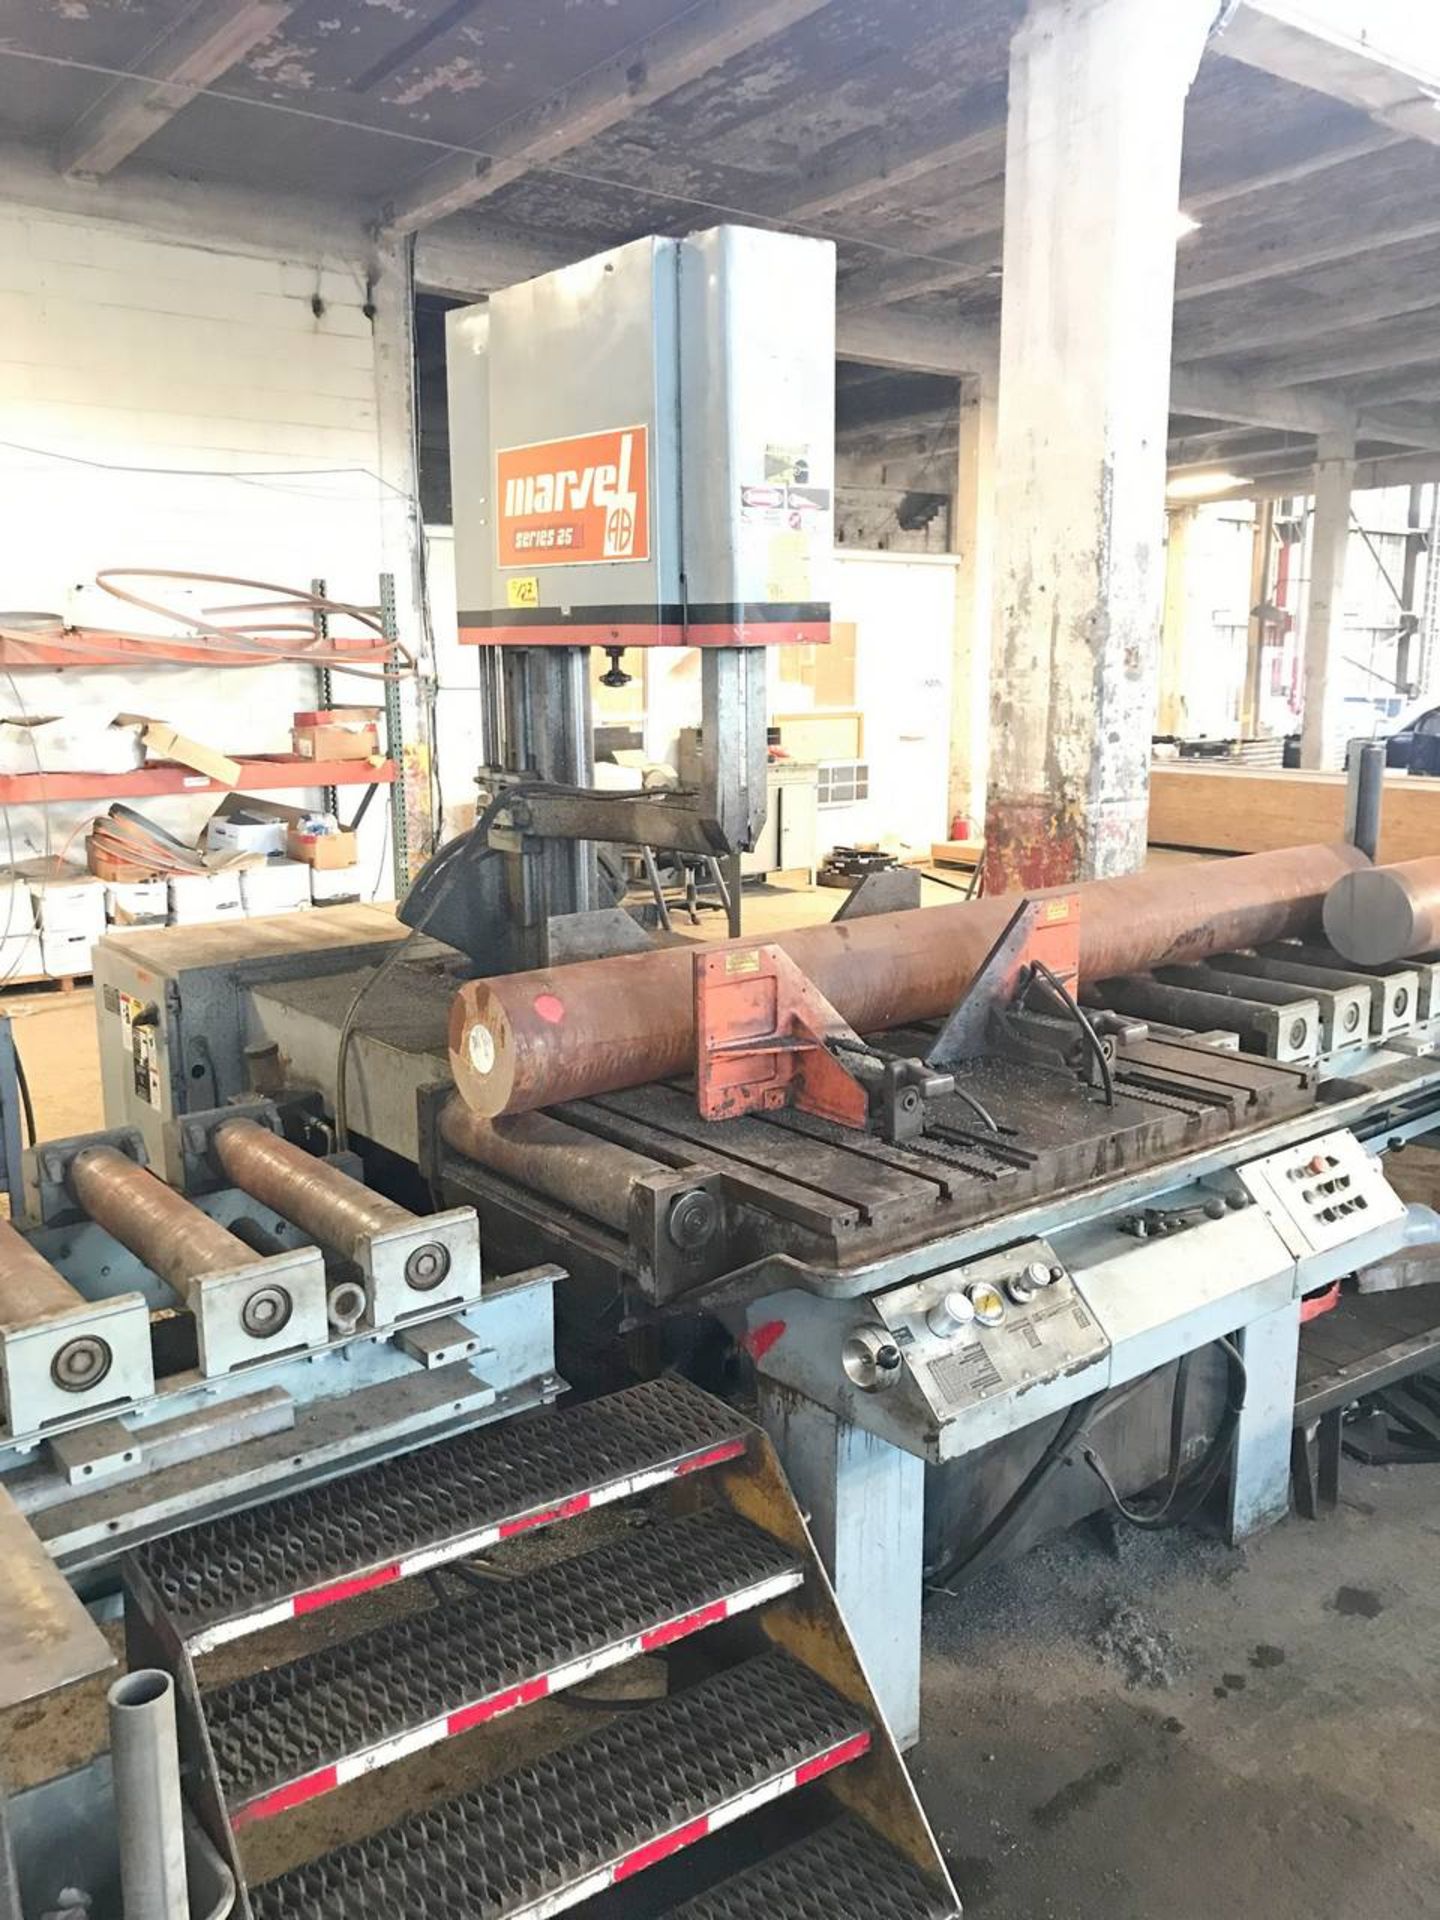 Marvel 25 Vertical Metalcutting Band Saw